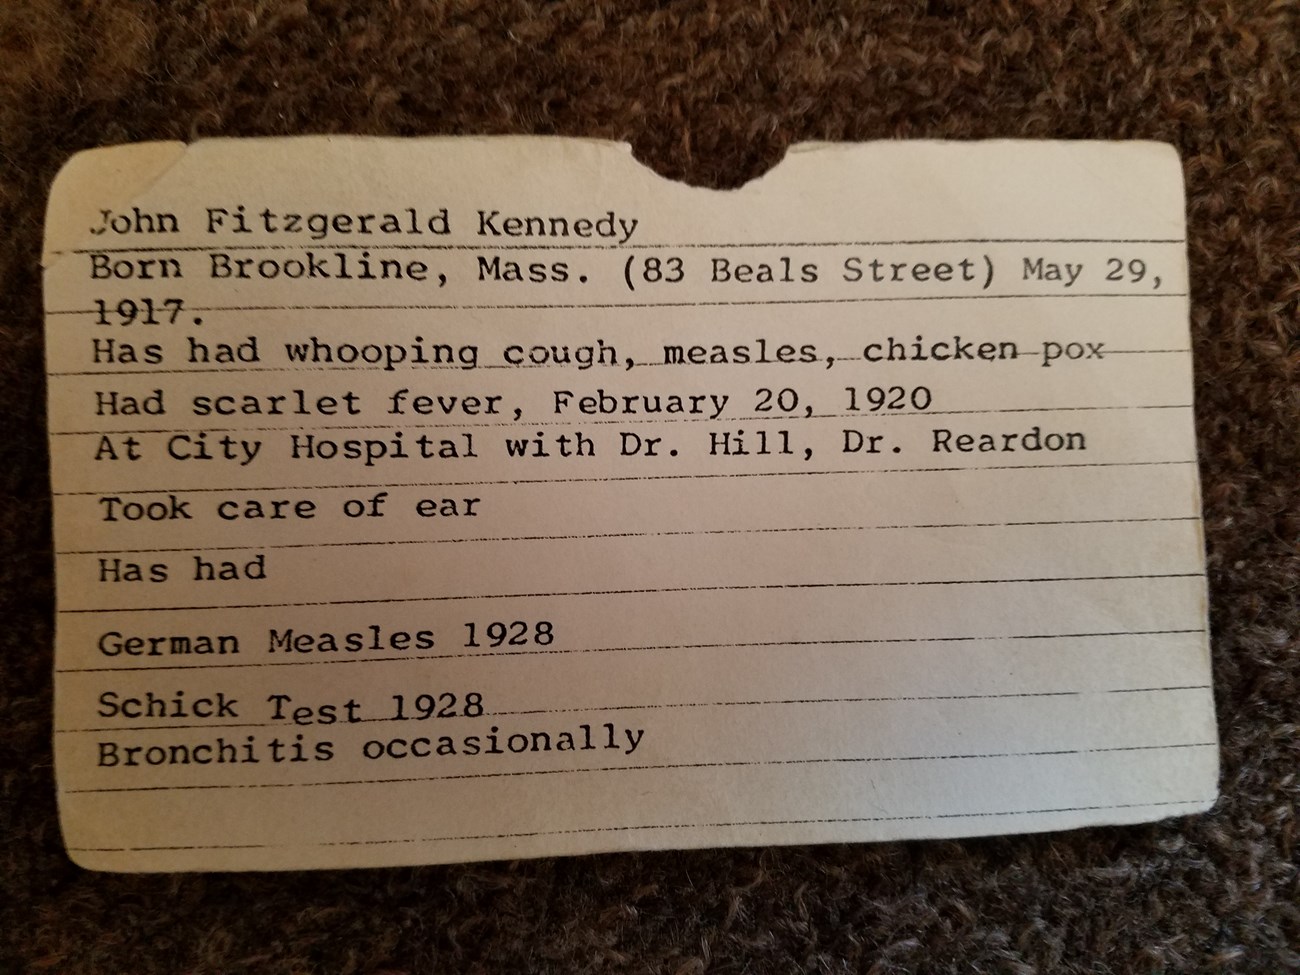 JFK's health card, listing a variety of childhood ailments.